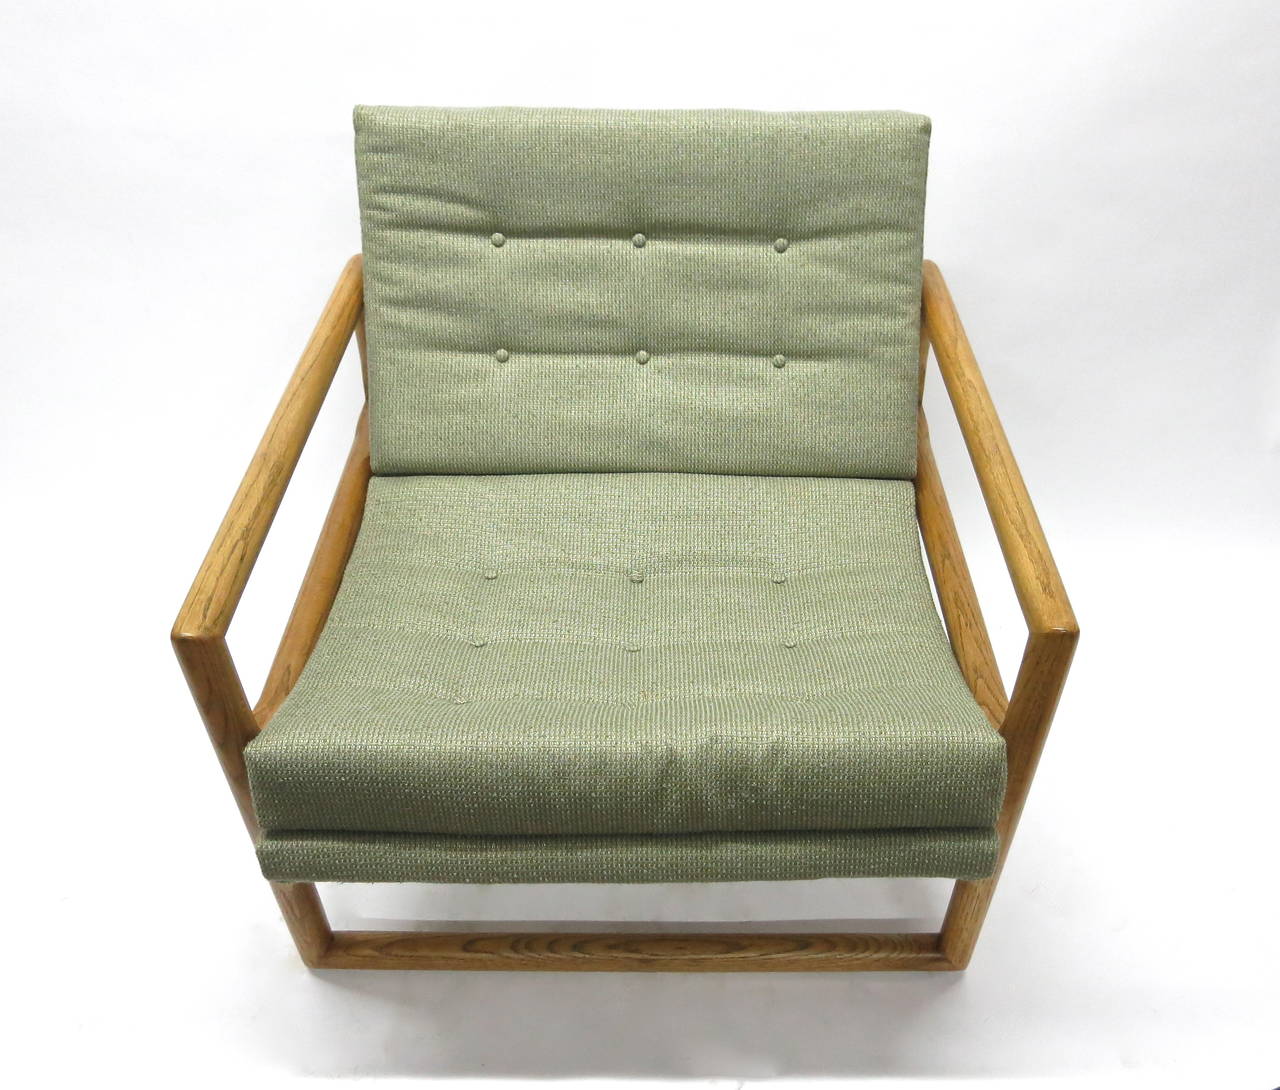 Vintage lounge chair with a rounded, solid oak frame that supports a newly upholstered seat in green and teal woven fabric. The wood has been refinished  and conditioned and maintains its natural aging.